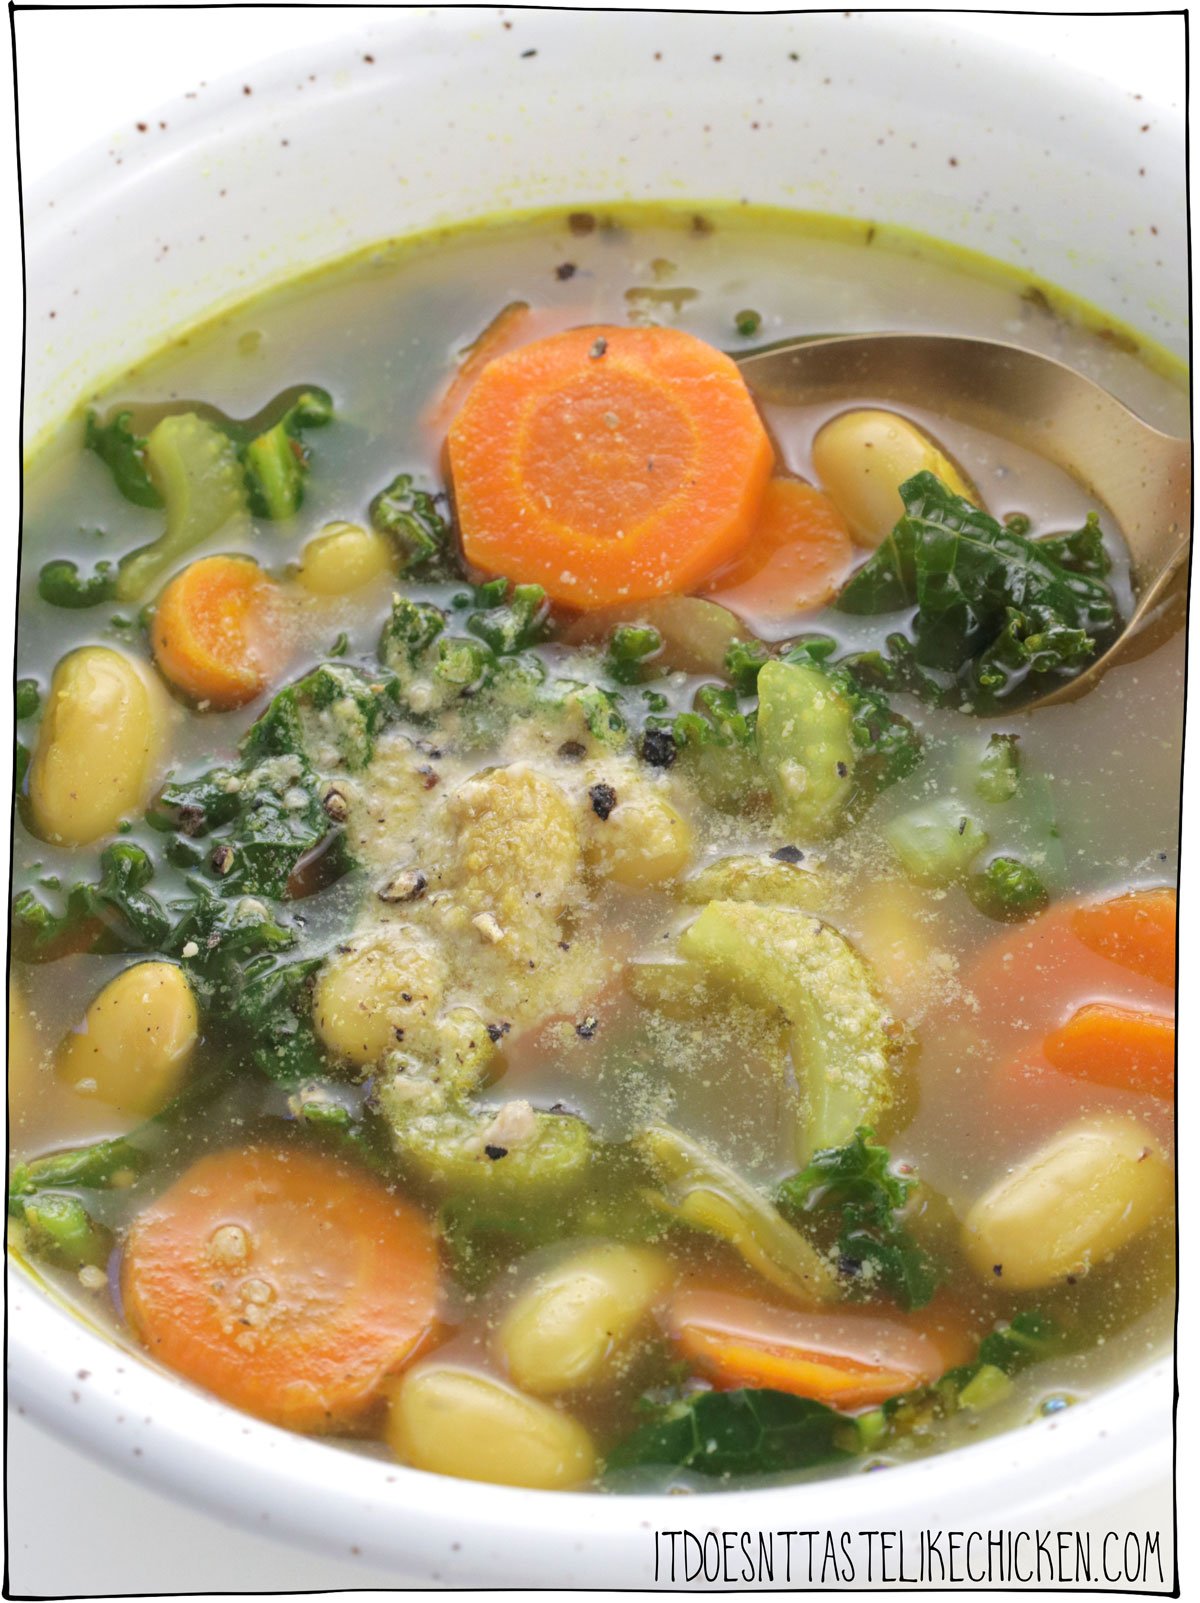 My go-to vegan soup recipe is this 20-minute white bean & kale soup because it's simple, packed full of veggies, made with ingredients you likely already have on hand and will make you feel great! #itdoesnttastelikechicken #veganrecipes #vegansoup